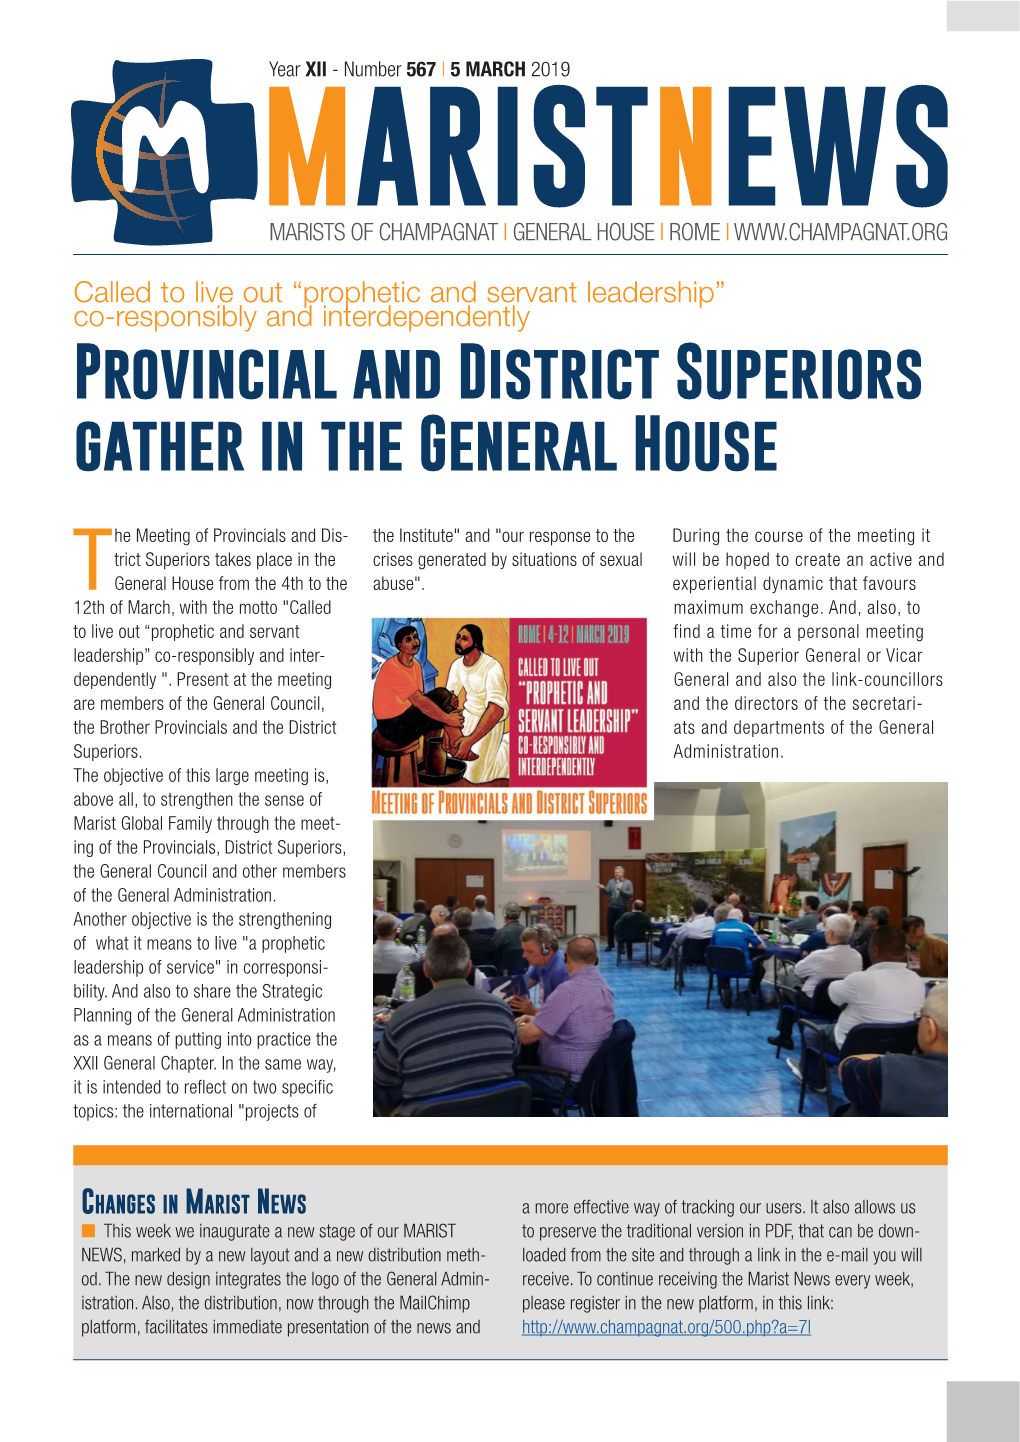 Provincial and District Superiors Gather in the General House